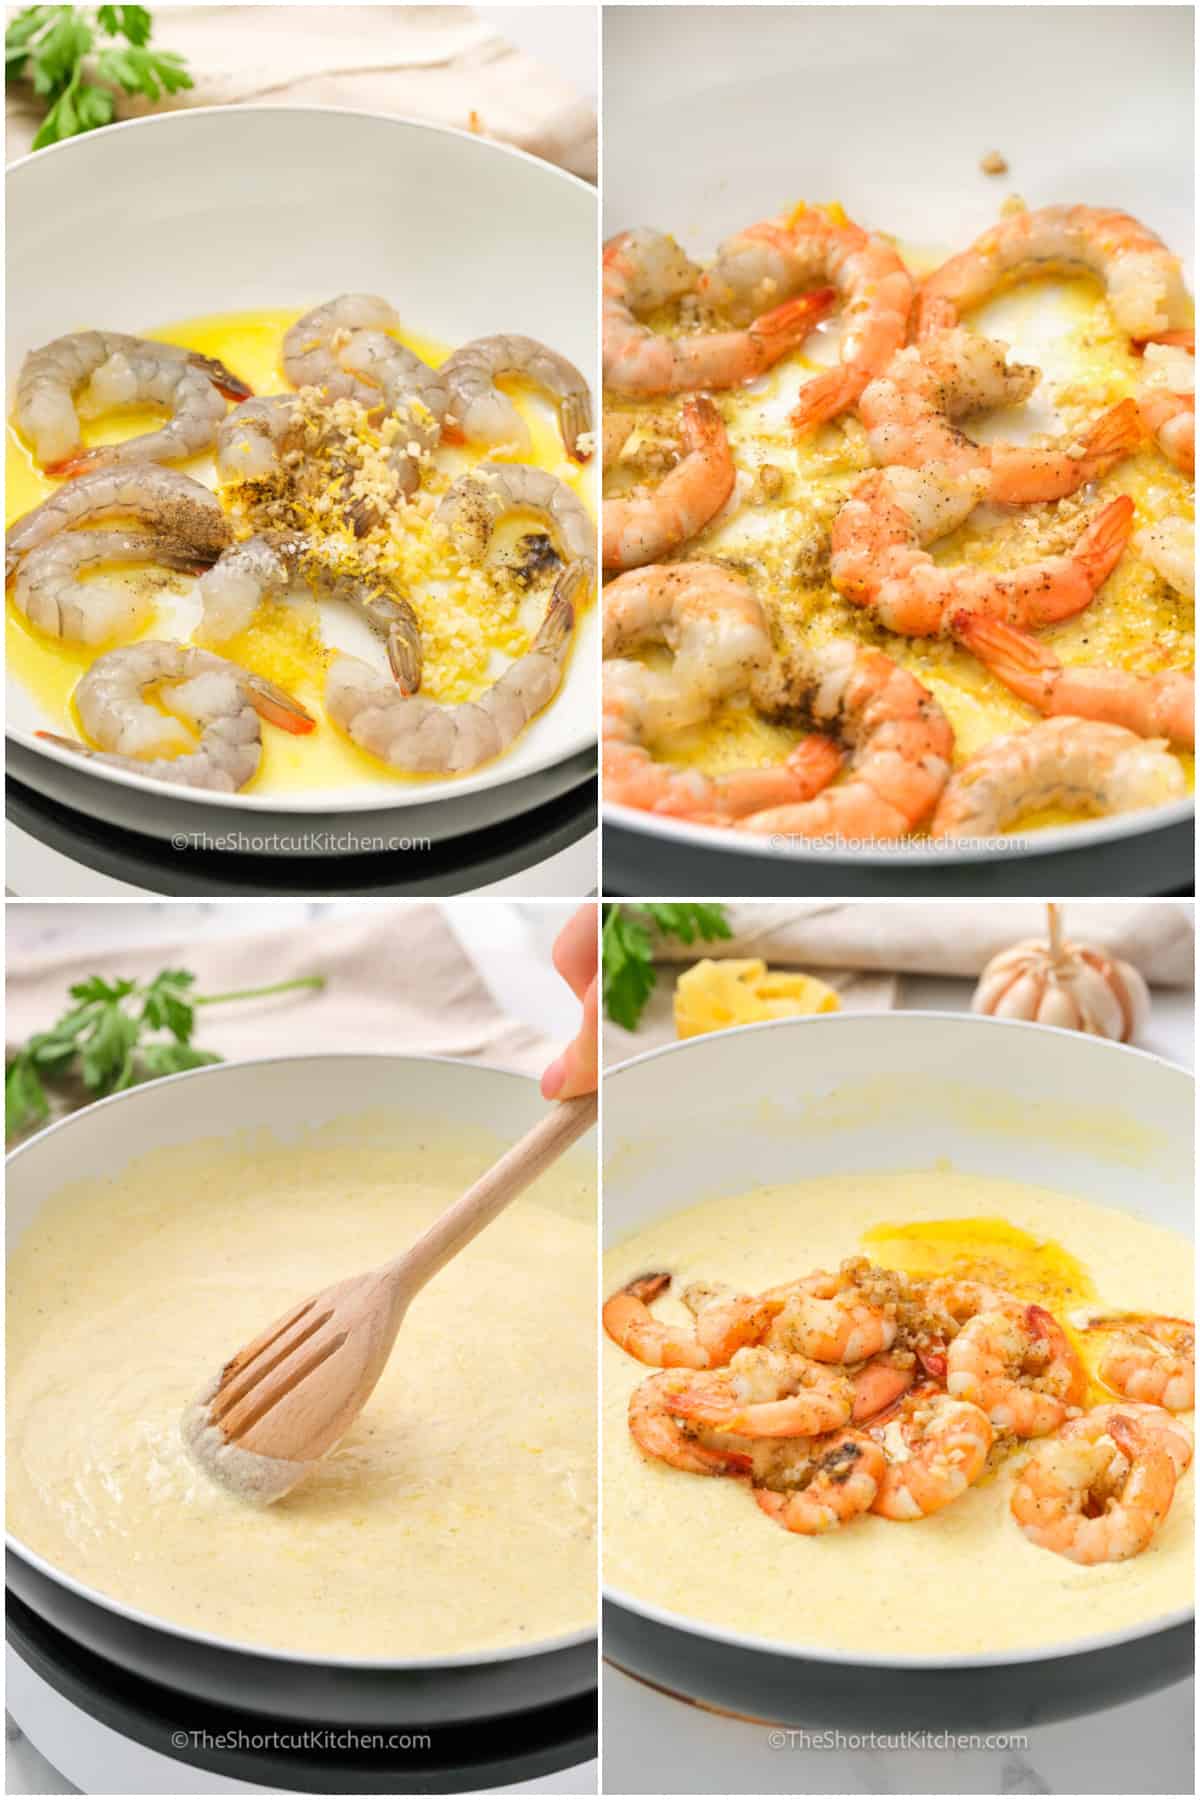 process to make Easy Shrimp Alfredo - cooking the shrimp, making the alfredo sauce, and adding shrimp to the sauce